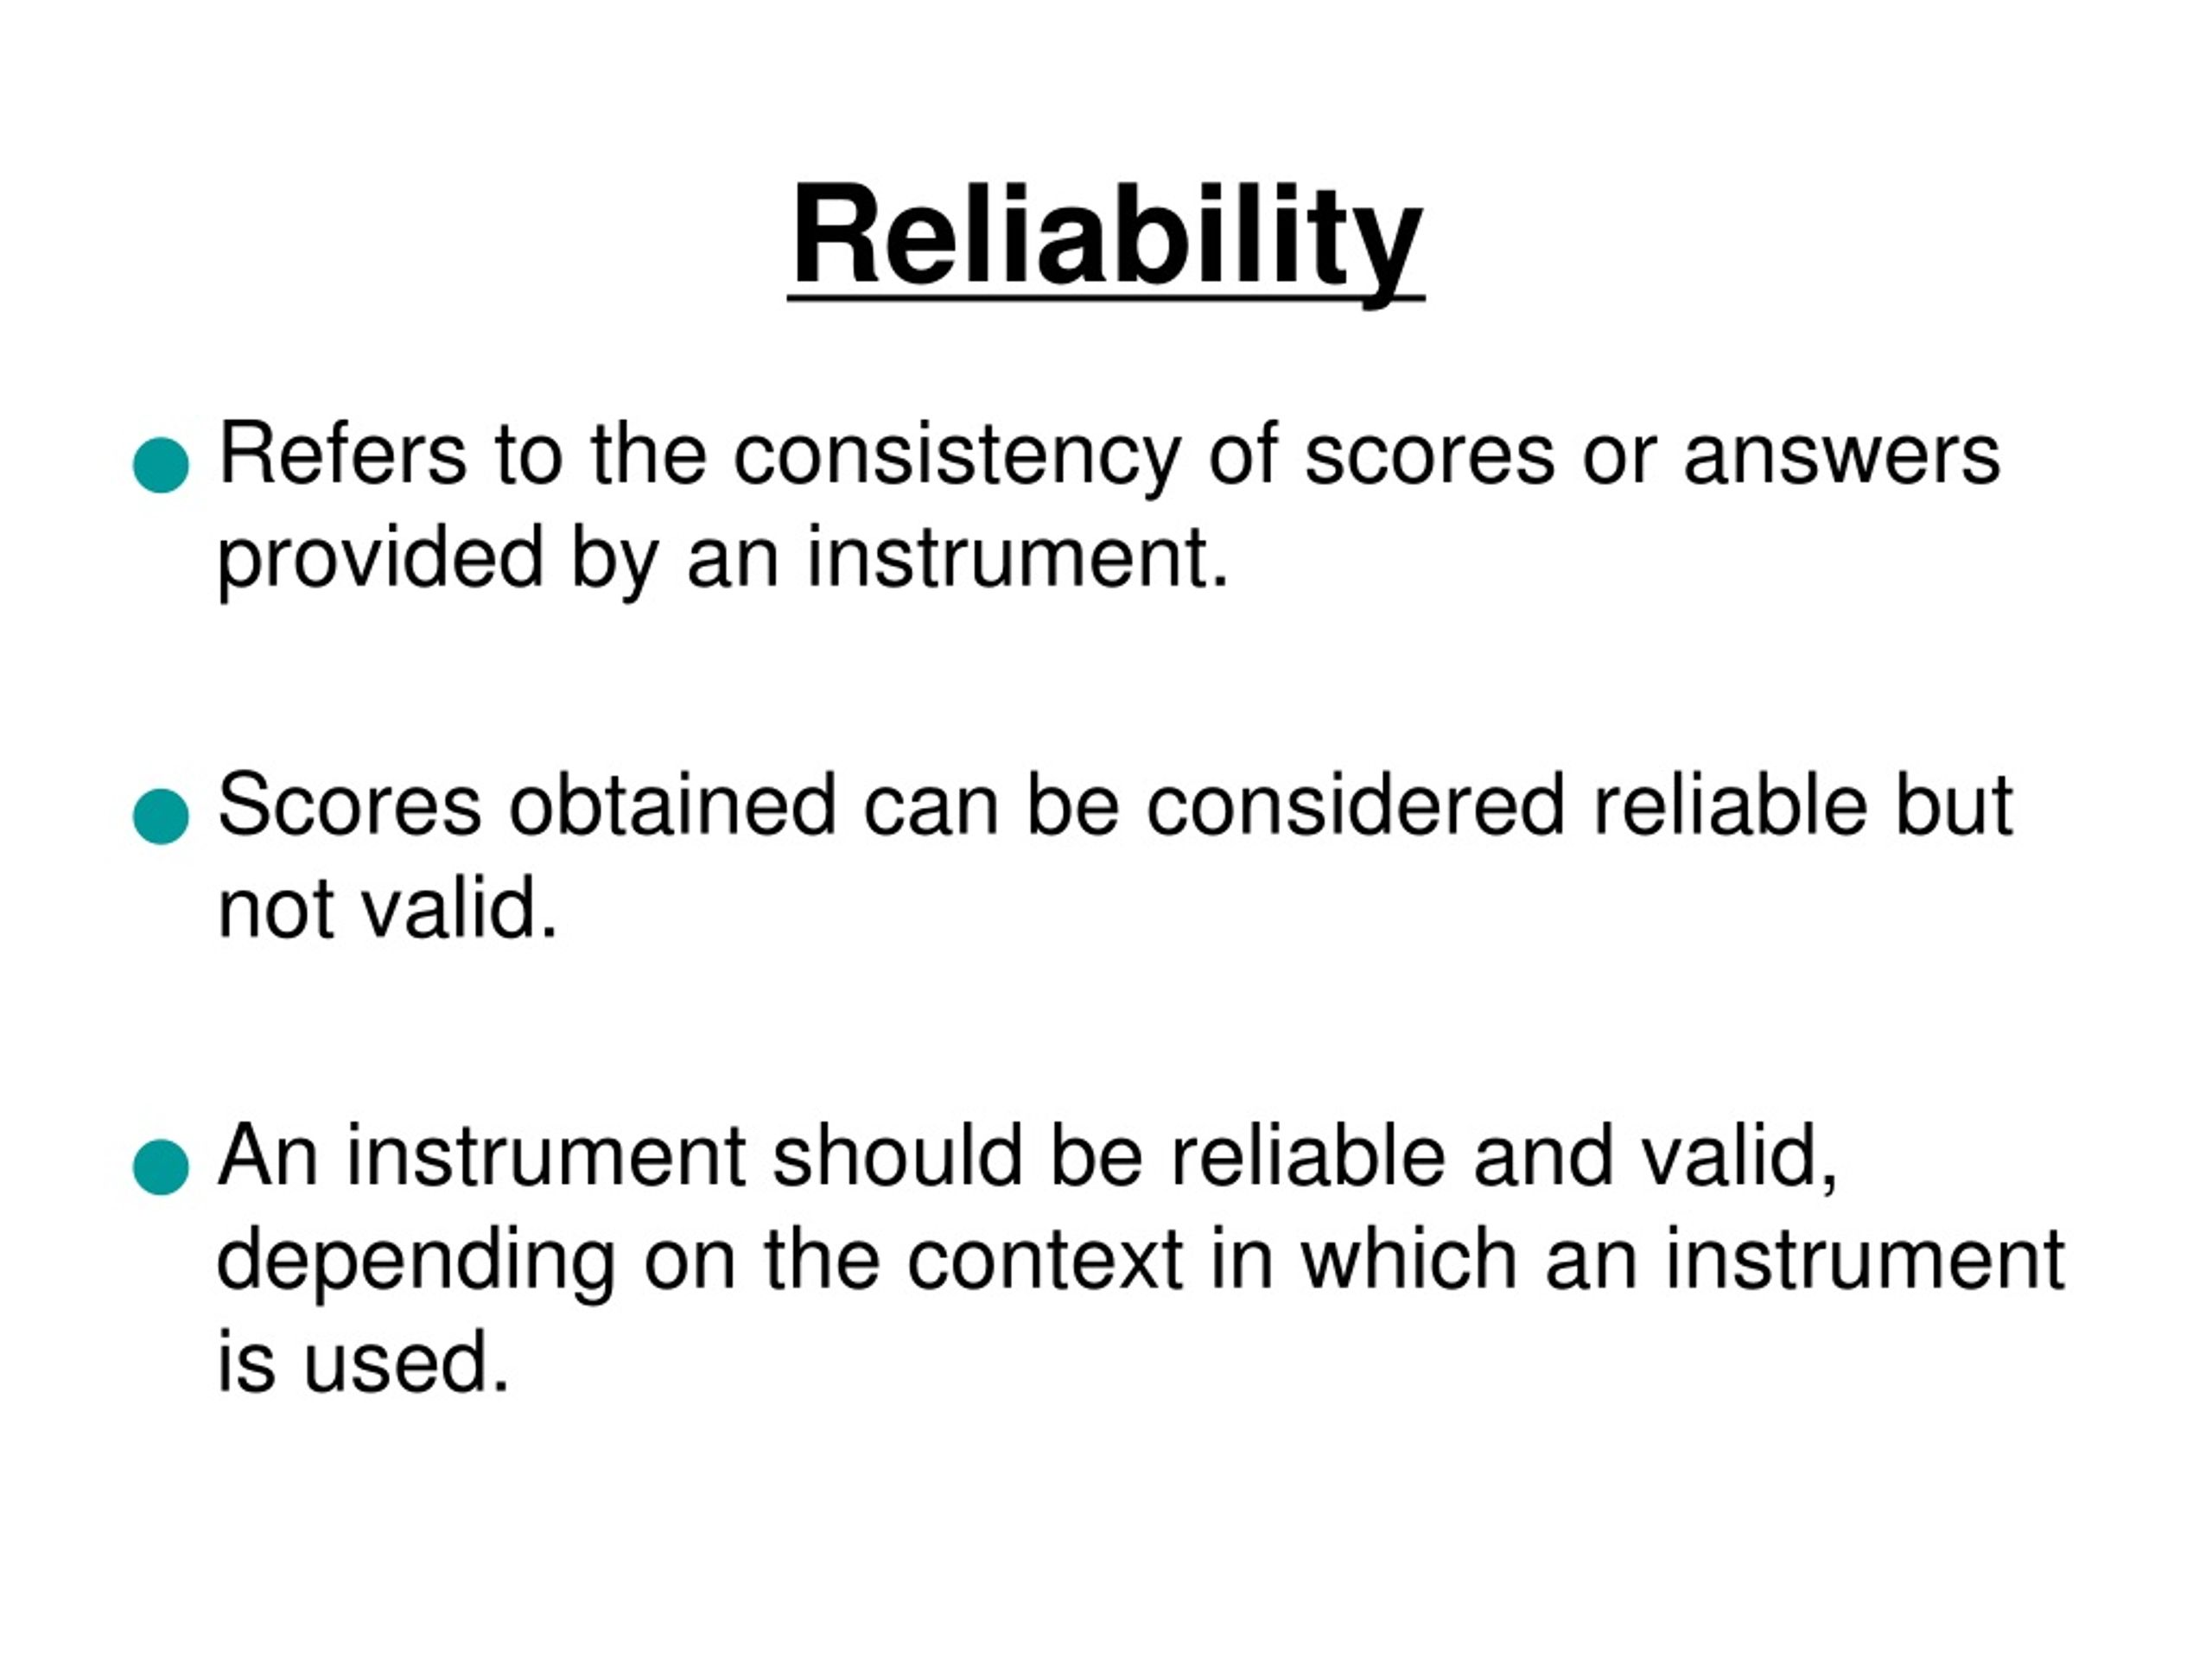 reliability in qualitative research refers to mcq